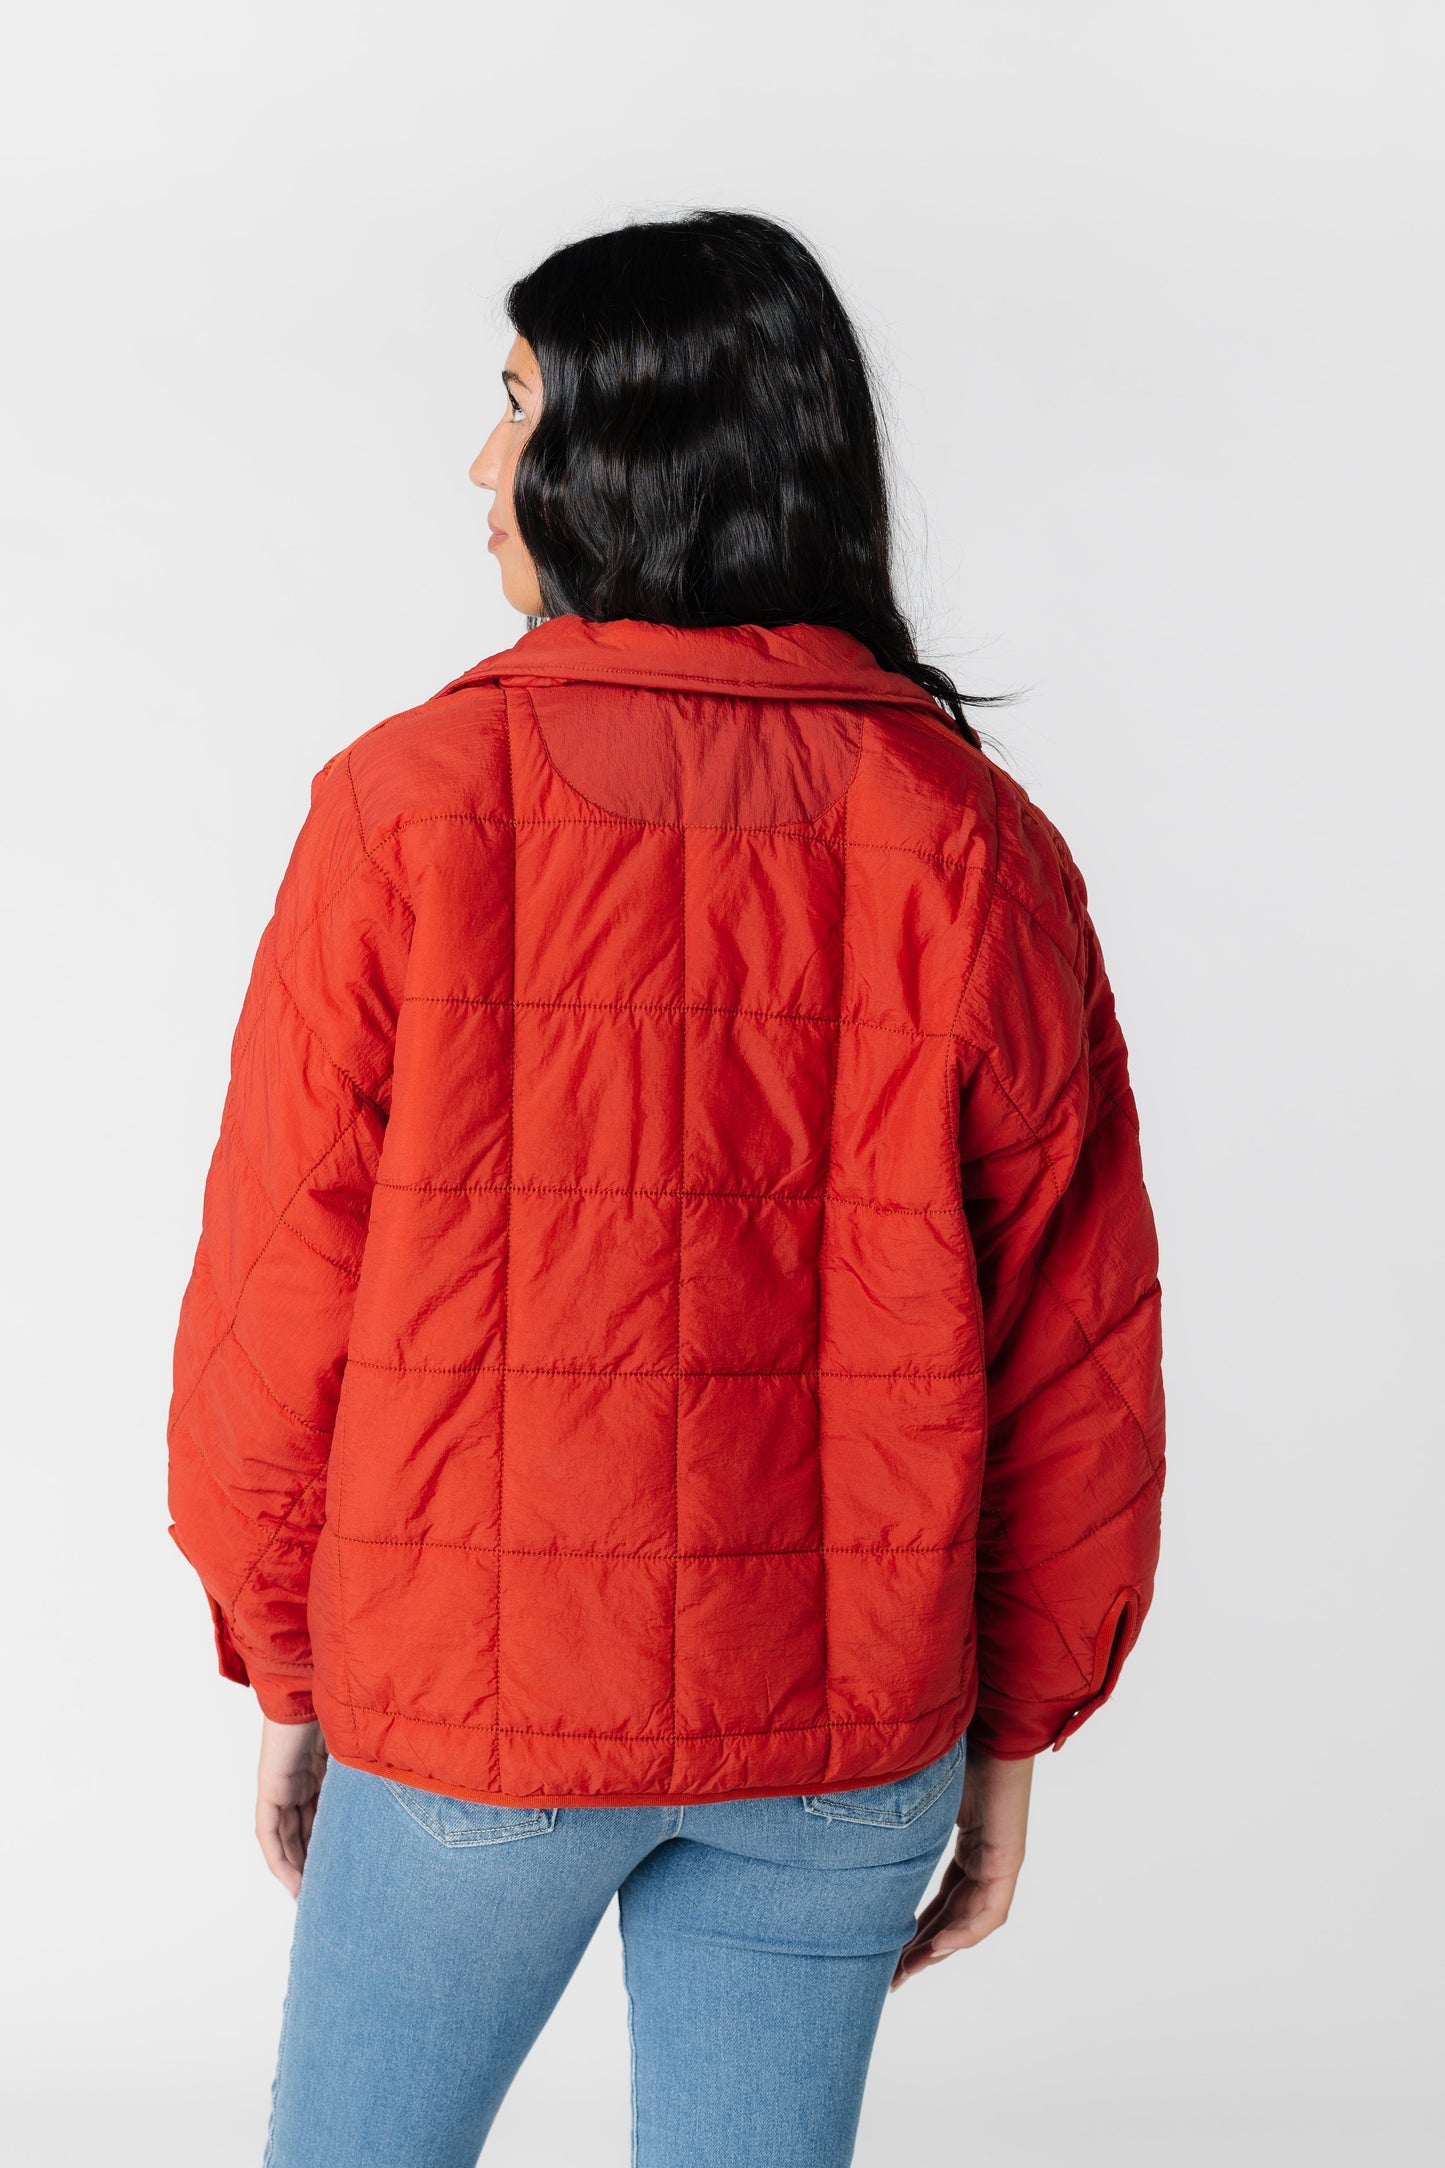 Pippie Packable Puffer Jacket - Fall Colors WOMEN'S JACKETS Veveret 